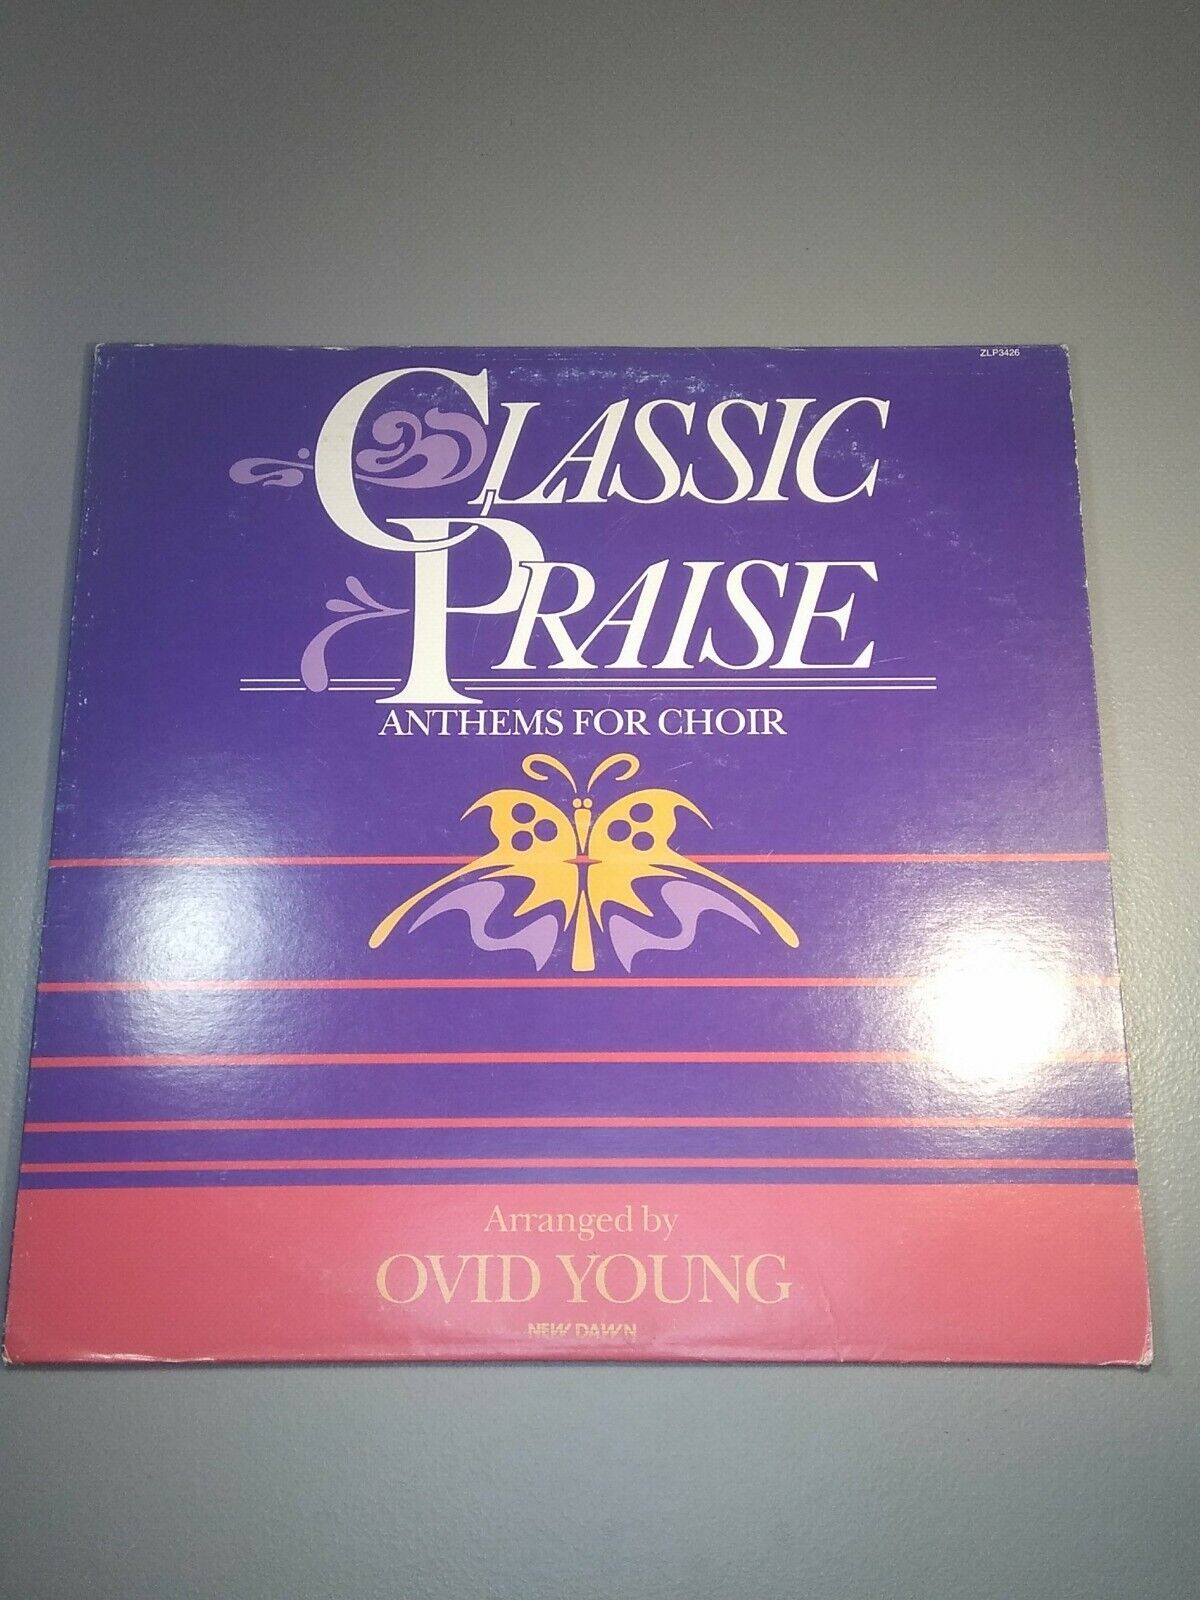 Vintage 1985 Classic Praise Anthems For Choir by Ovid Young Vinyl LP Record Good